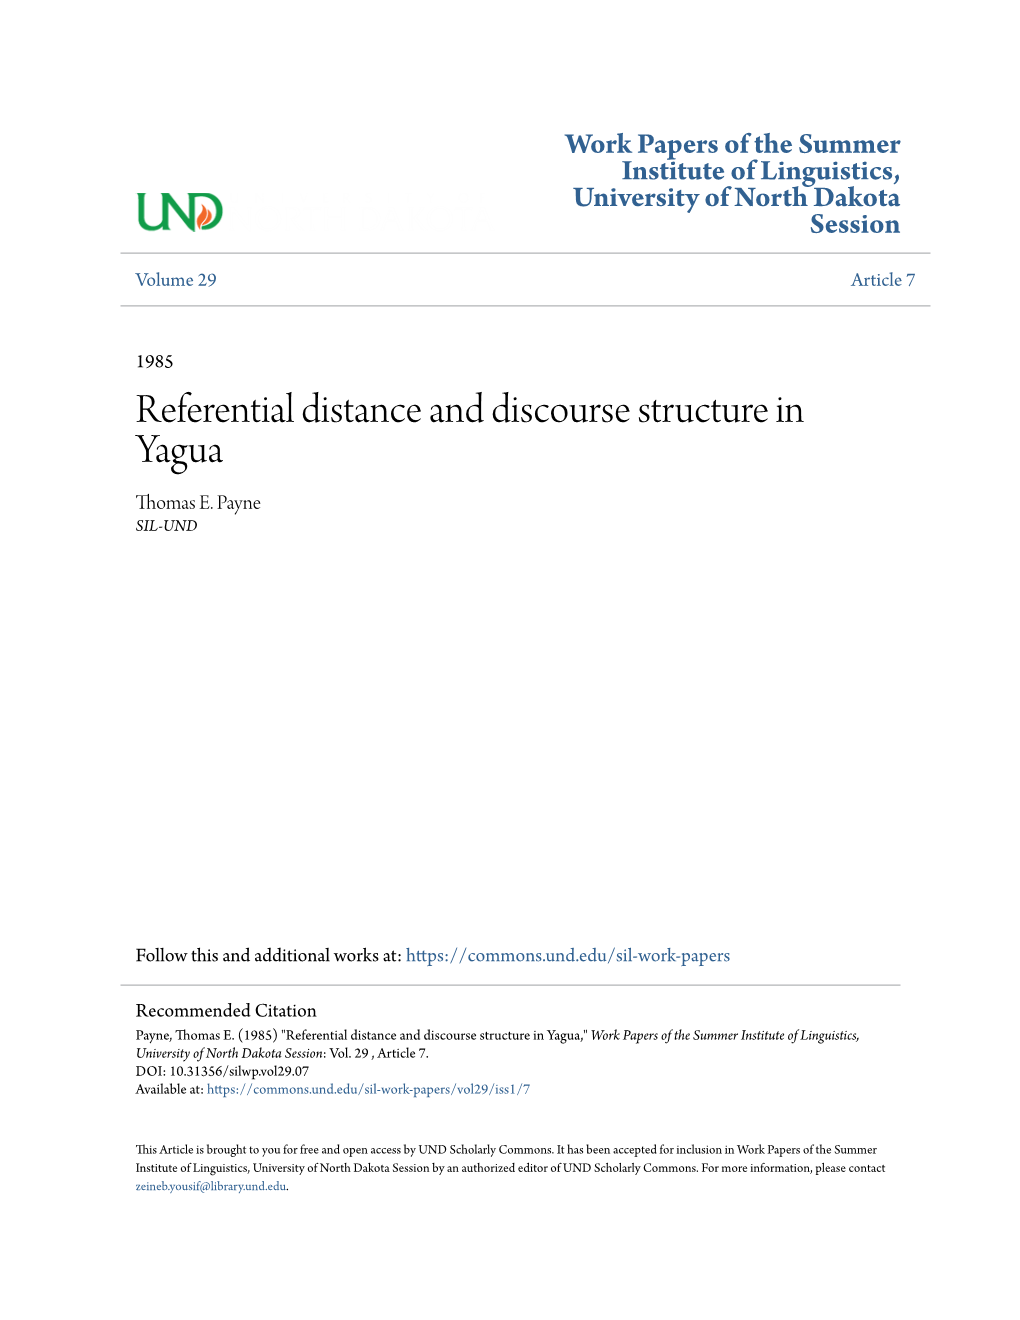 Referential Distance and Discourse Structure in Yagua Thomas E